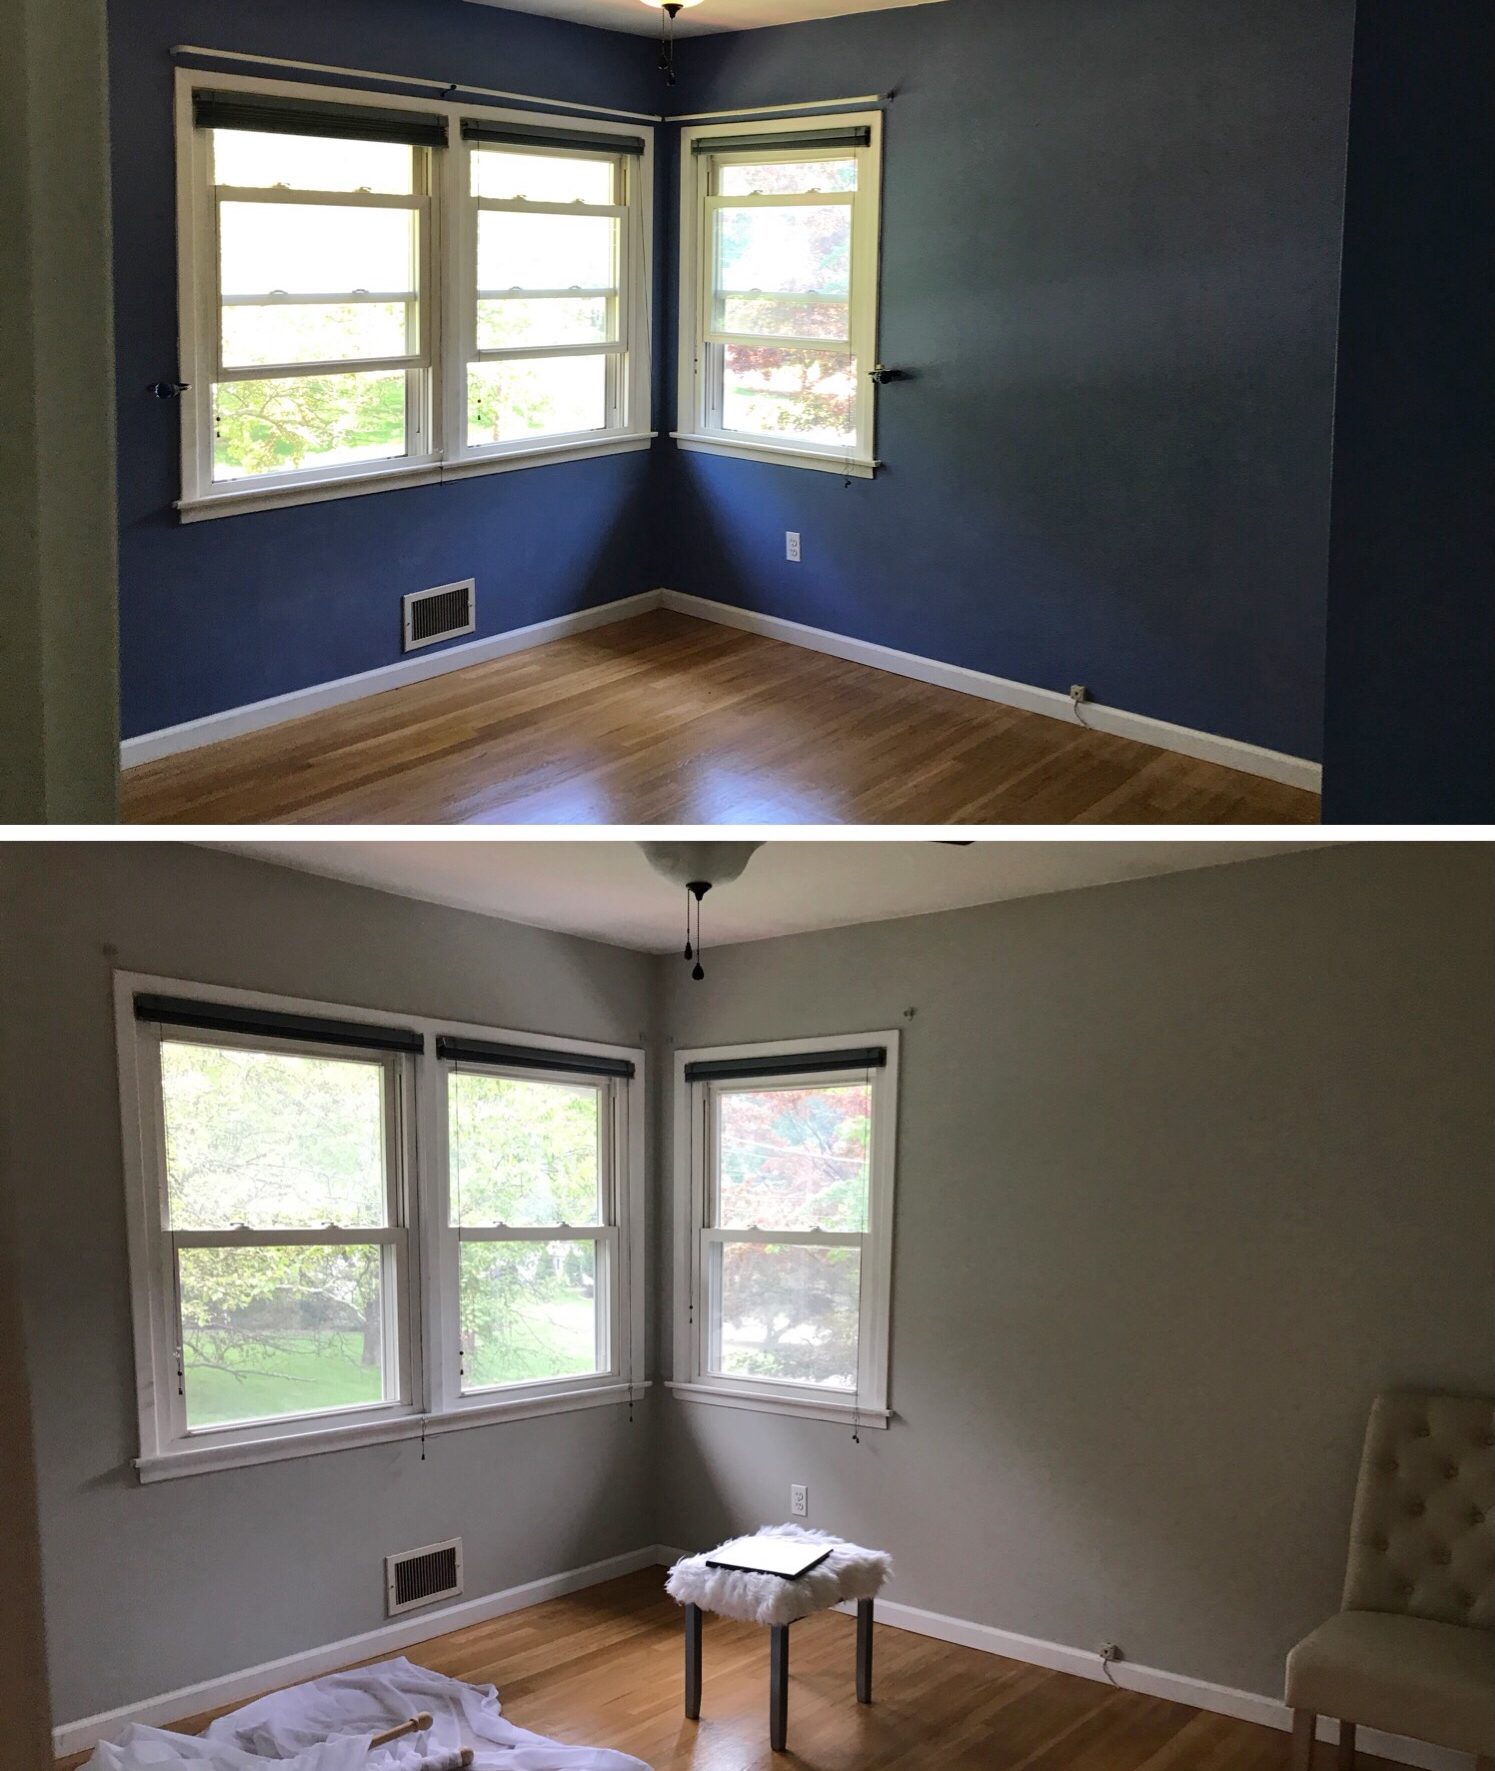 Before and after, Home decor, Interior design, Interior decor, Gray Paint, Sherwin Williams, Glam Decor, Redesign, Interior, Interior design, Home inspo, Decor inspo